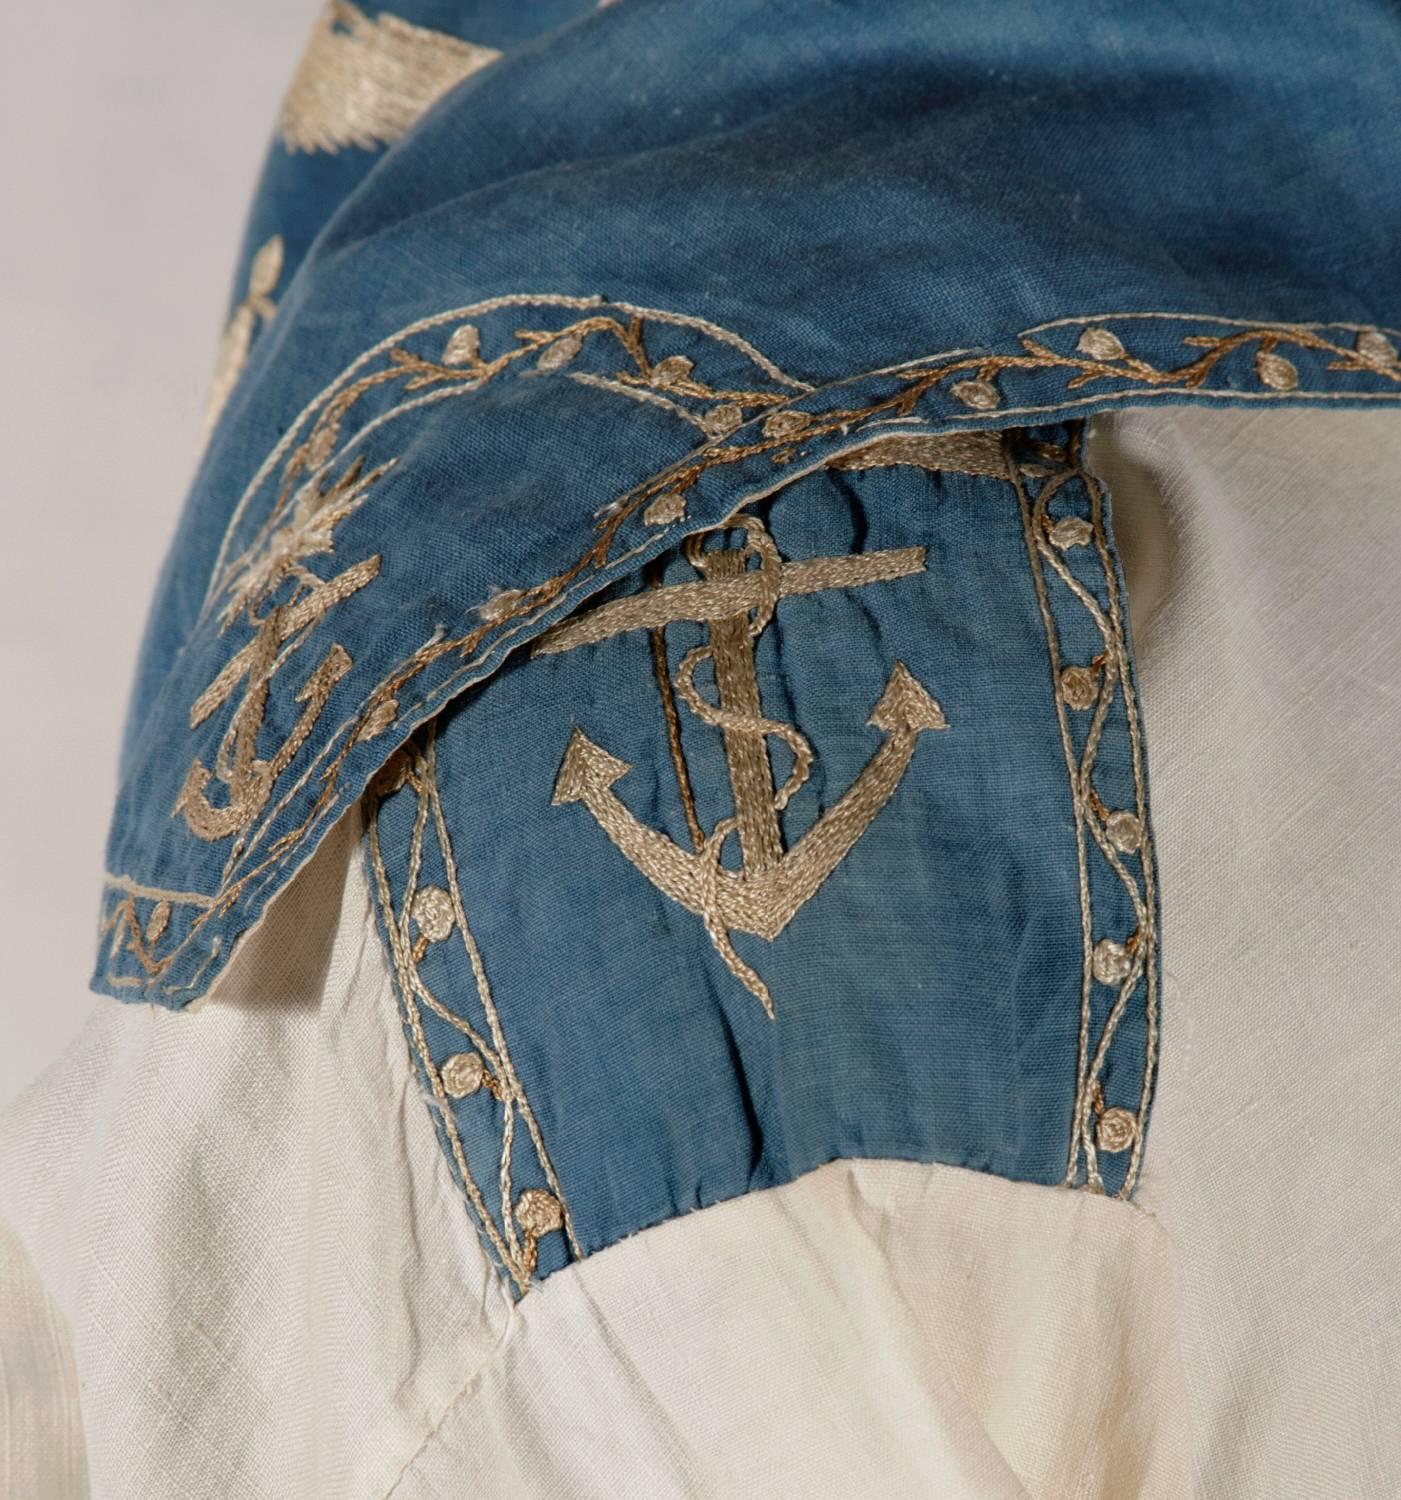 Mid-19th Century Navyman's Frock and Jack Tar Hat with Elaborate Patriotic Decoration